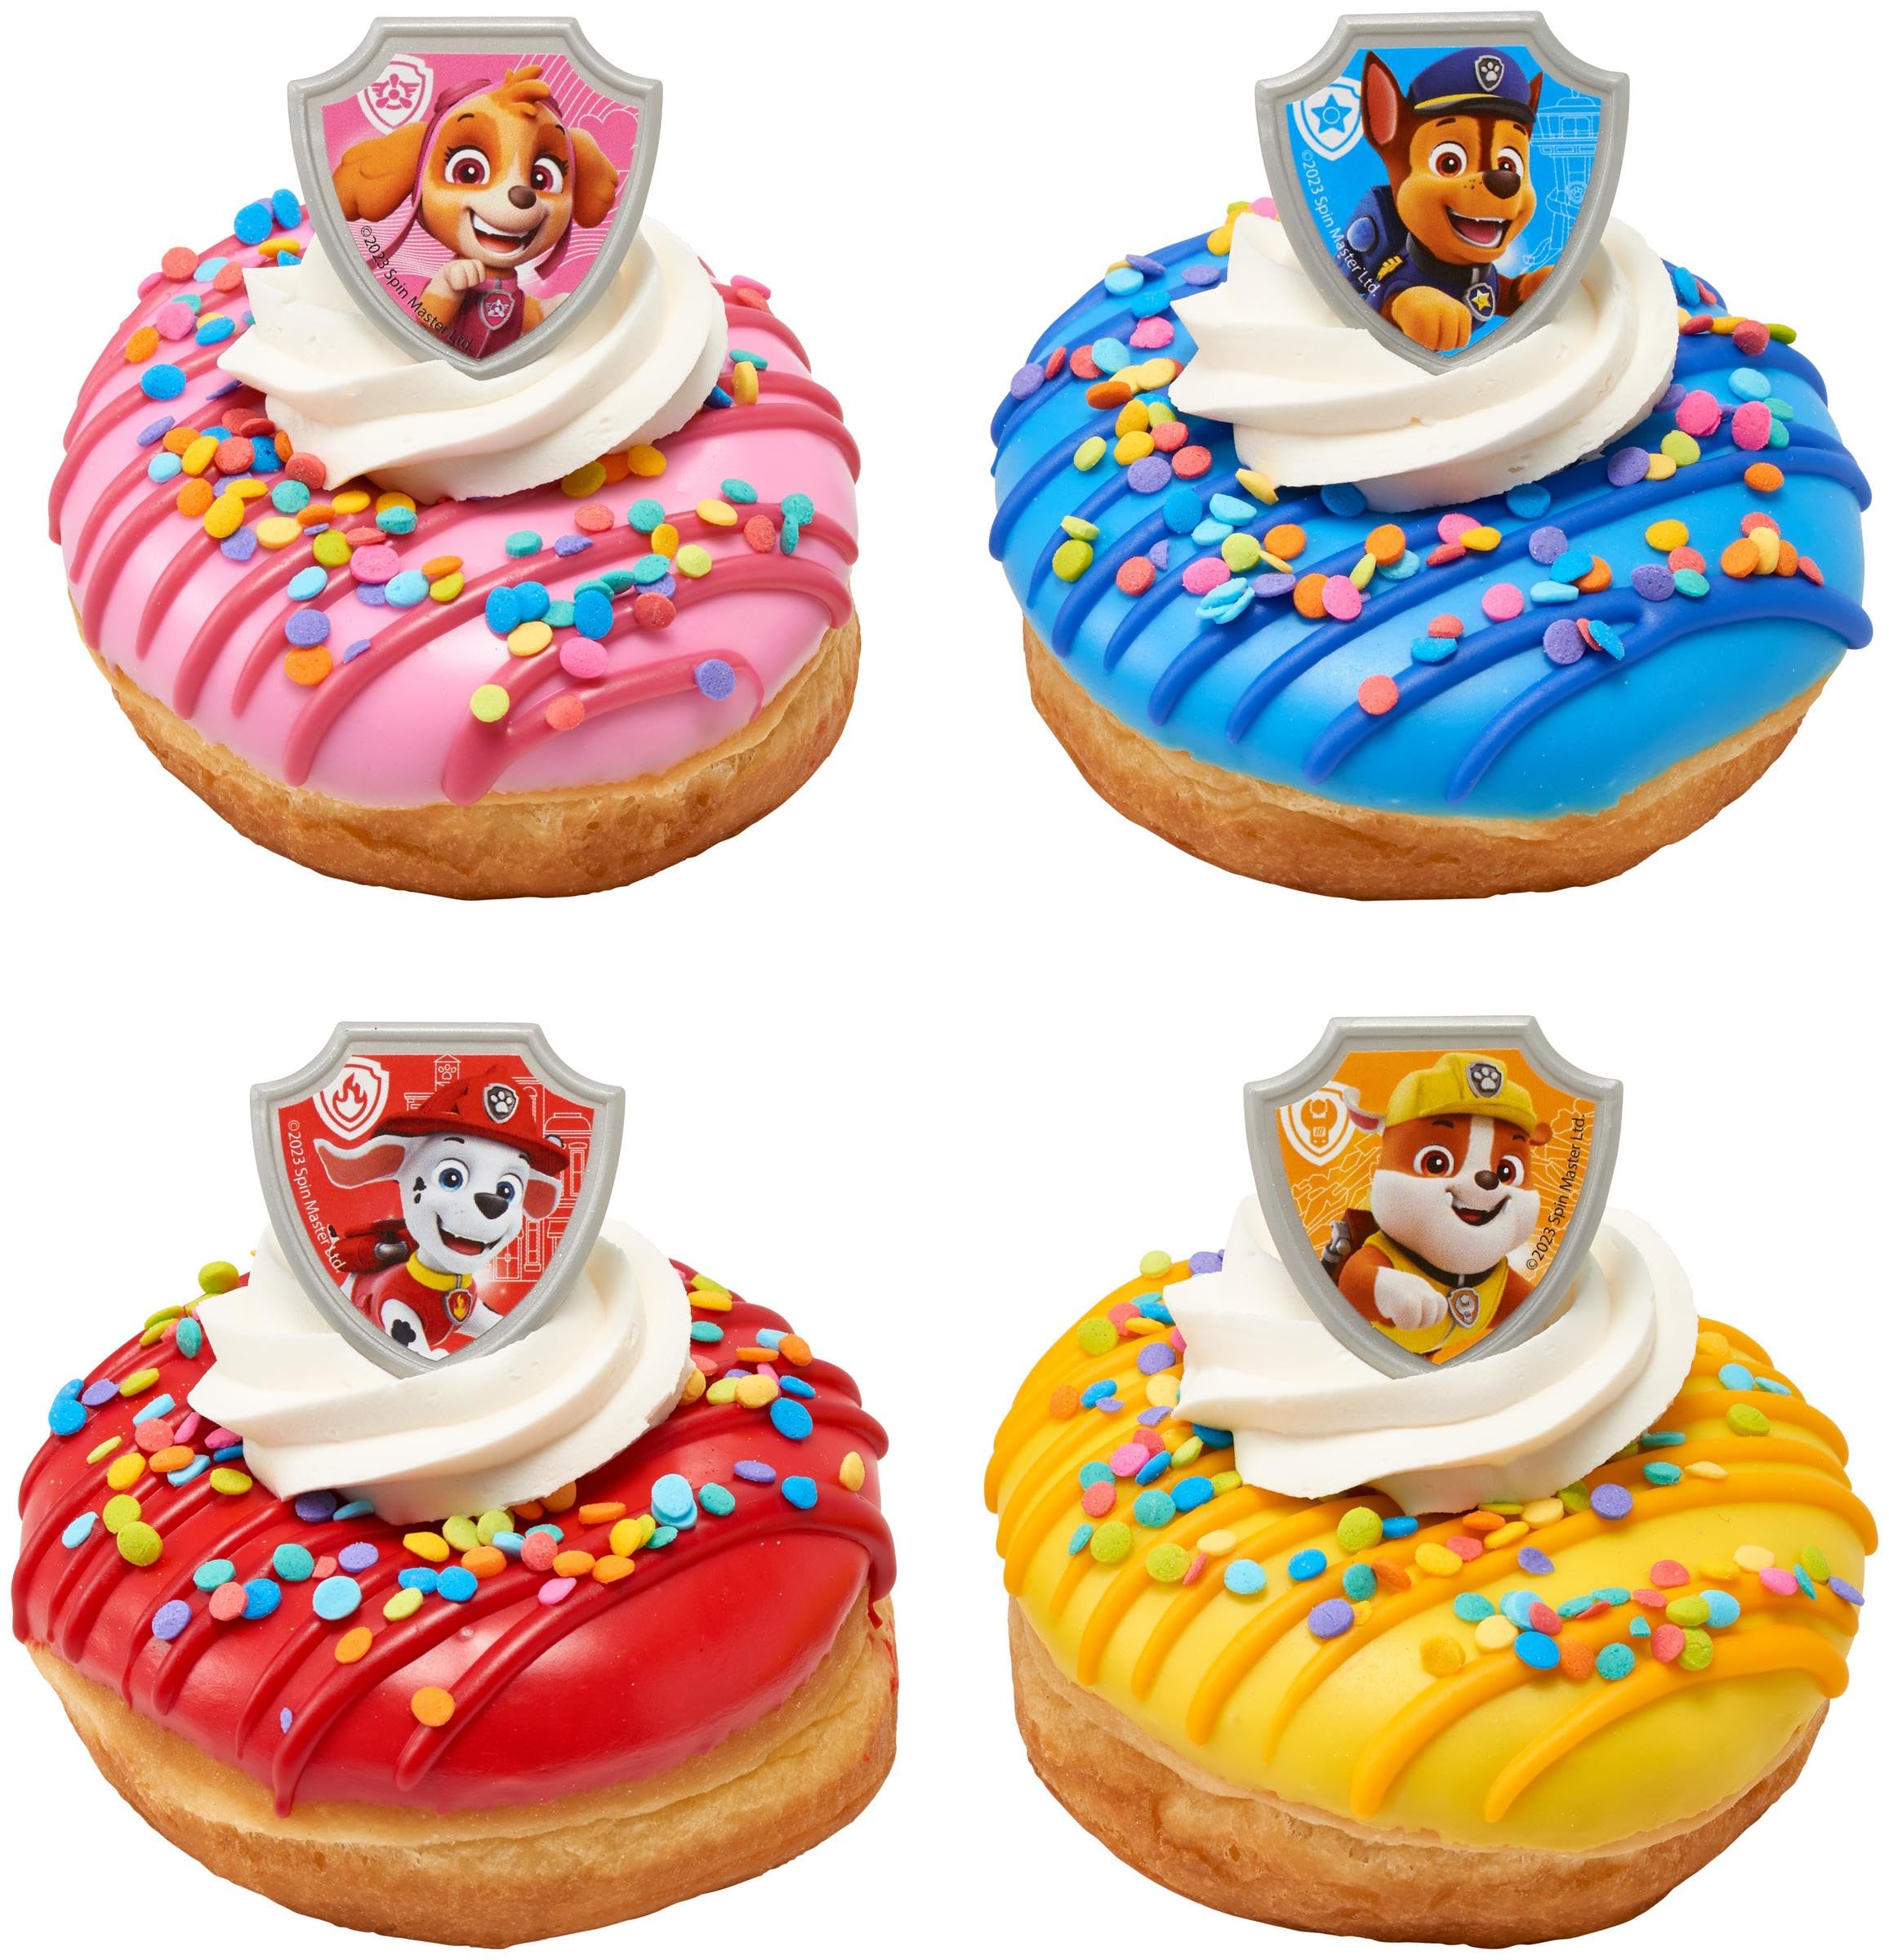 DecoPac Paw Patrol Reporting For Duty Rings, Cupcake Decorations Featuring Rocky, Marshall, Skye, And Rubble - 24 Pack